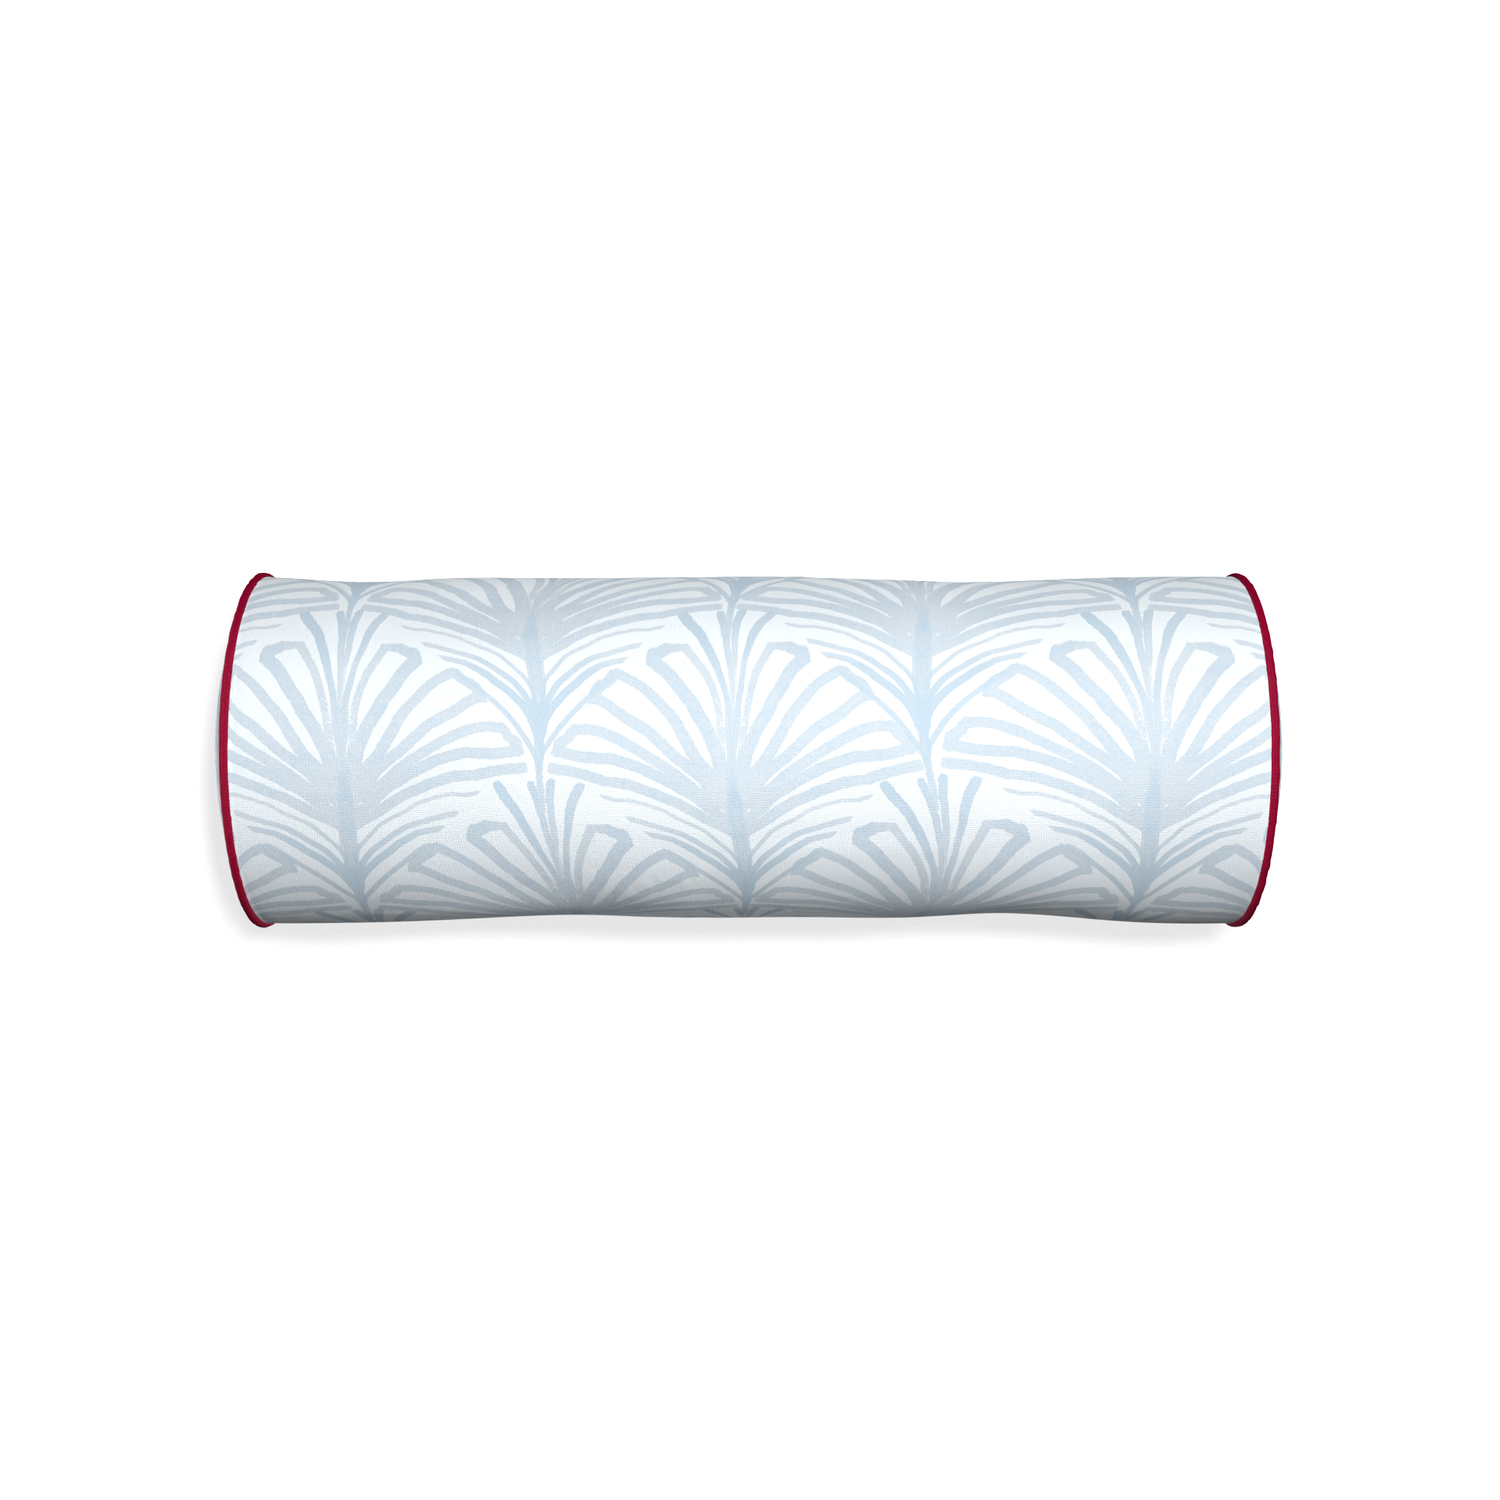 Bolster suzy sky custom pillow with raspberry piping on white background